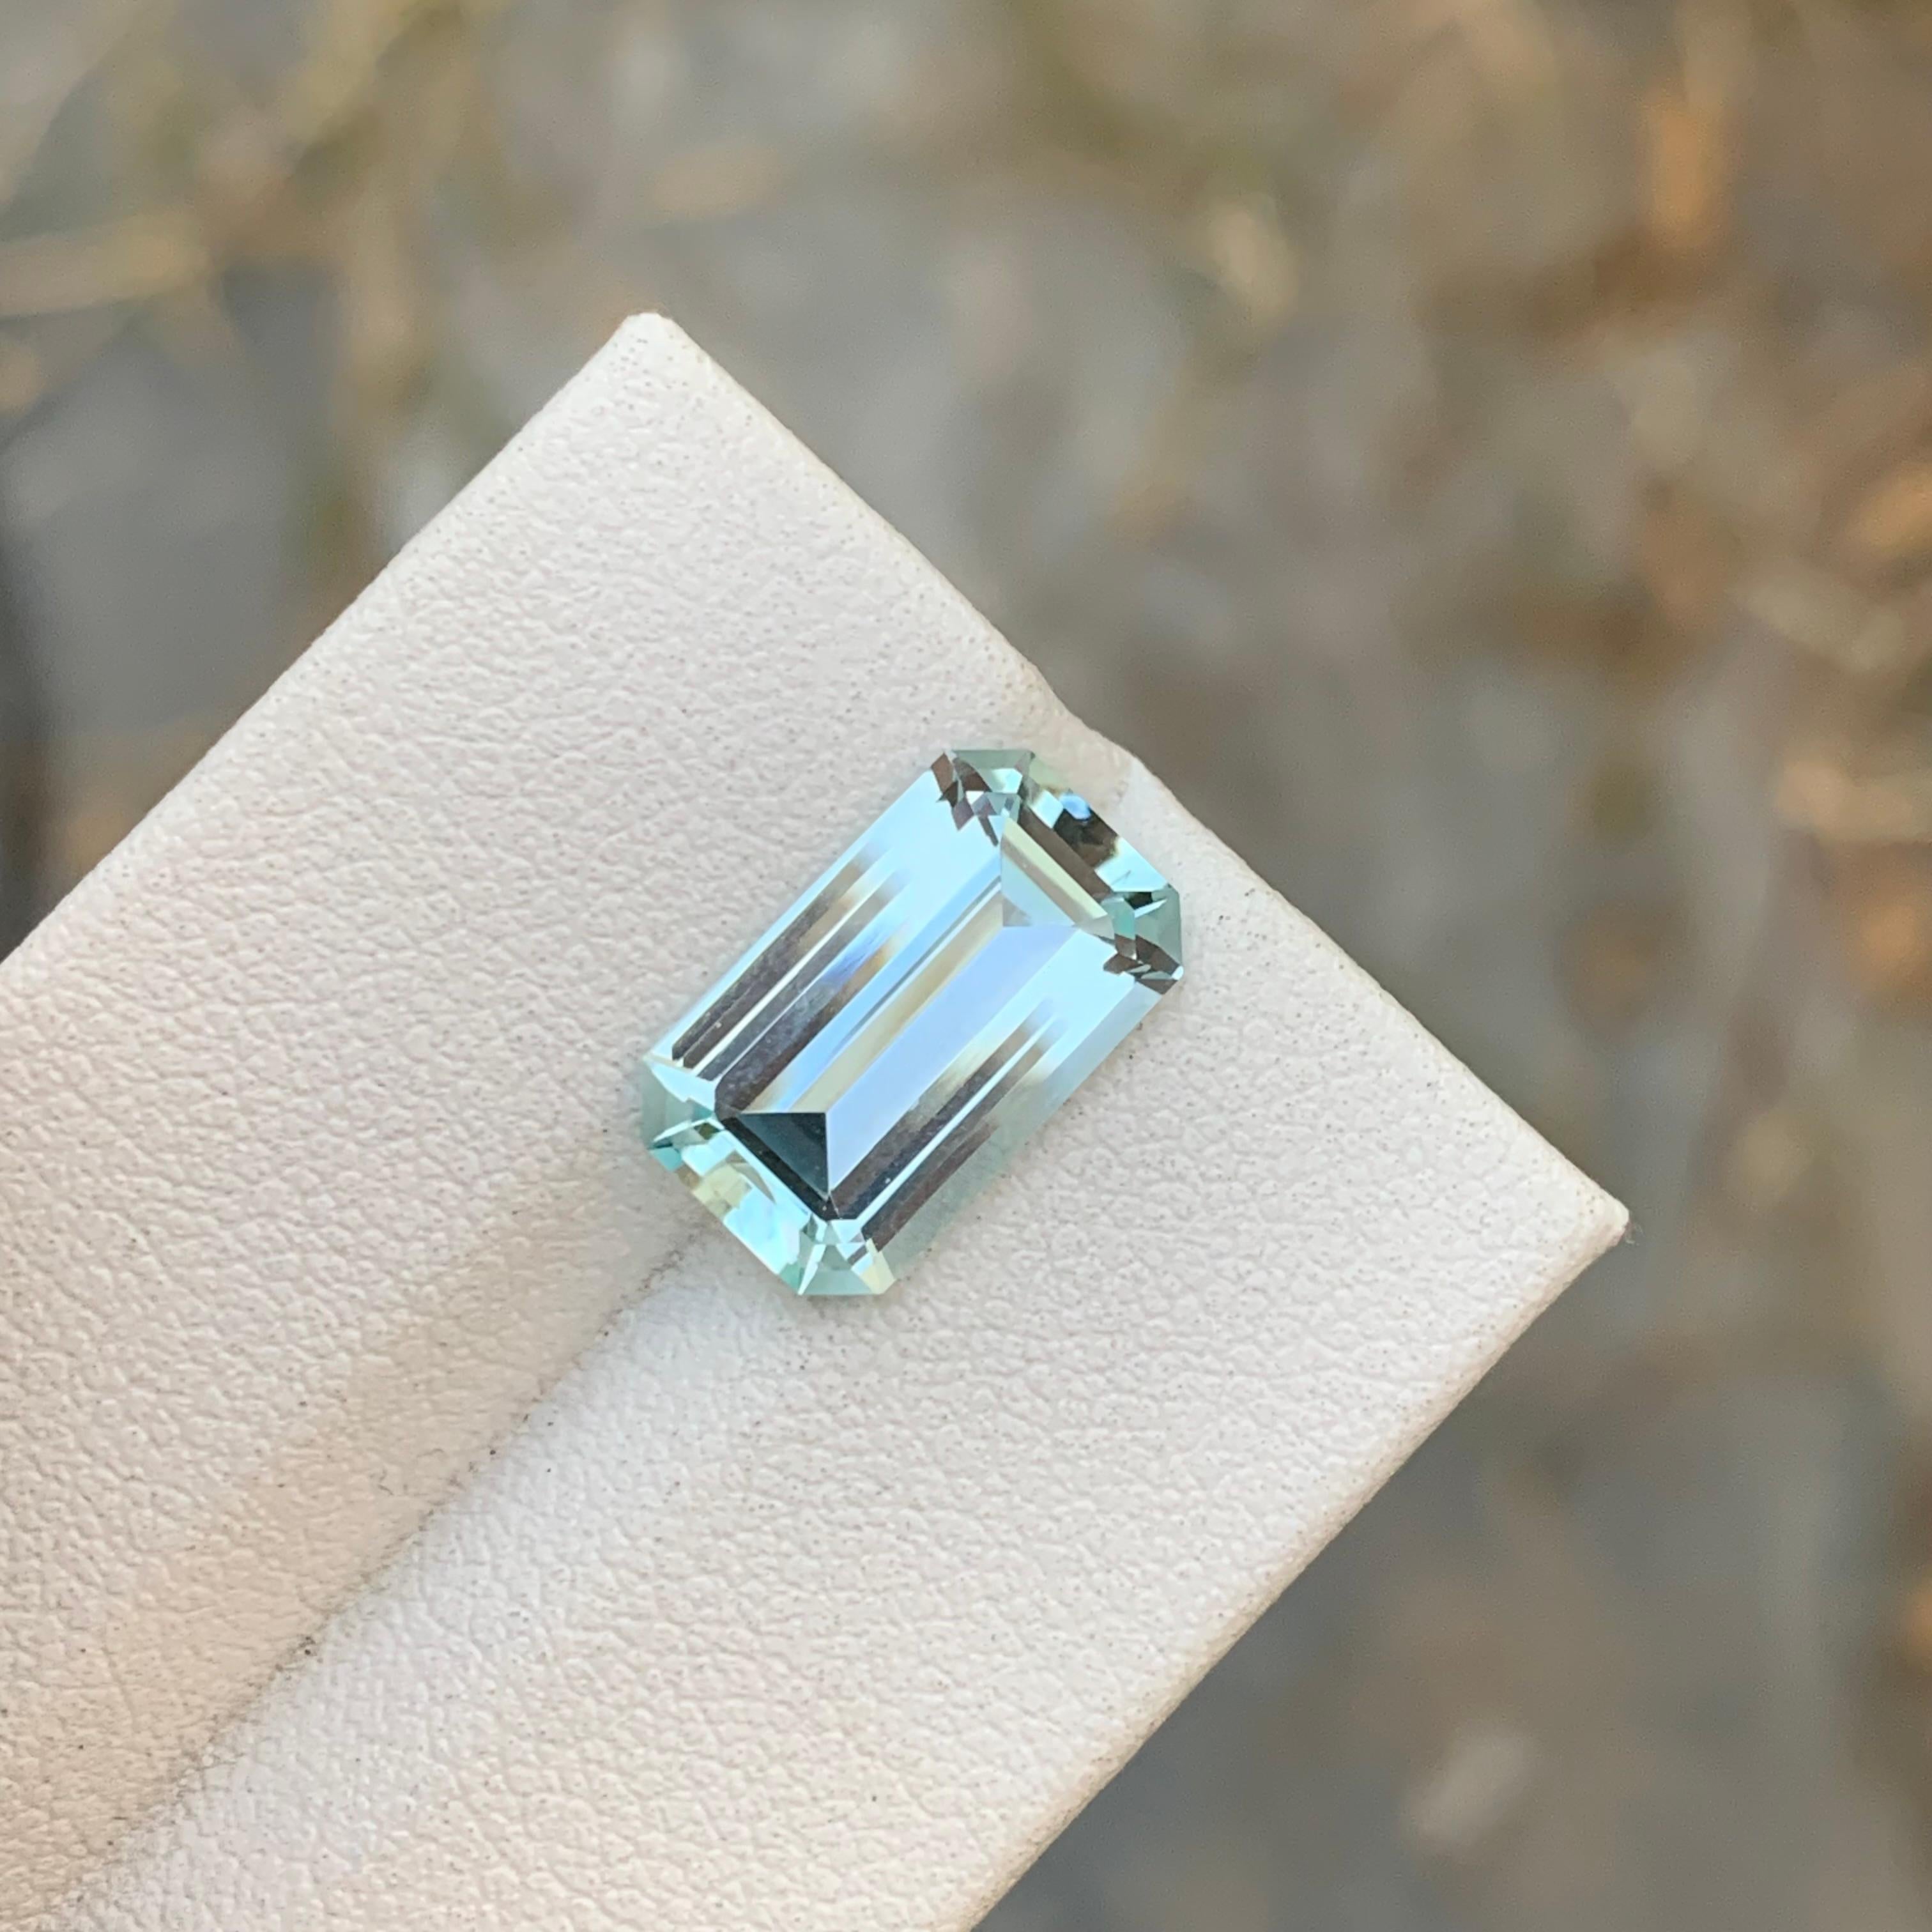 Loose Aquamarine
Weight: 3.65 Carat
Dimension: 13.2 x 7.9 x 4.9 Mm
Colour : Blue and white
Origin: Shigar Valley, Pakistan
Treatment: Non
Certificate : On Demand
Shape: Emerald

Aquamarine is a captivating gemstone known for its enchanting